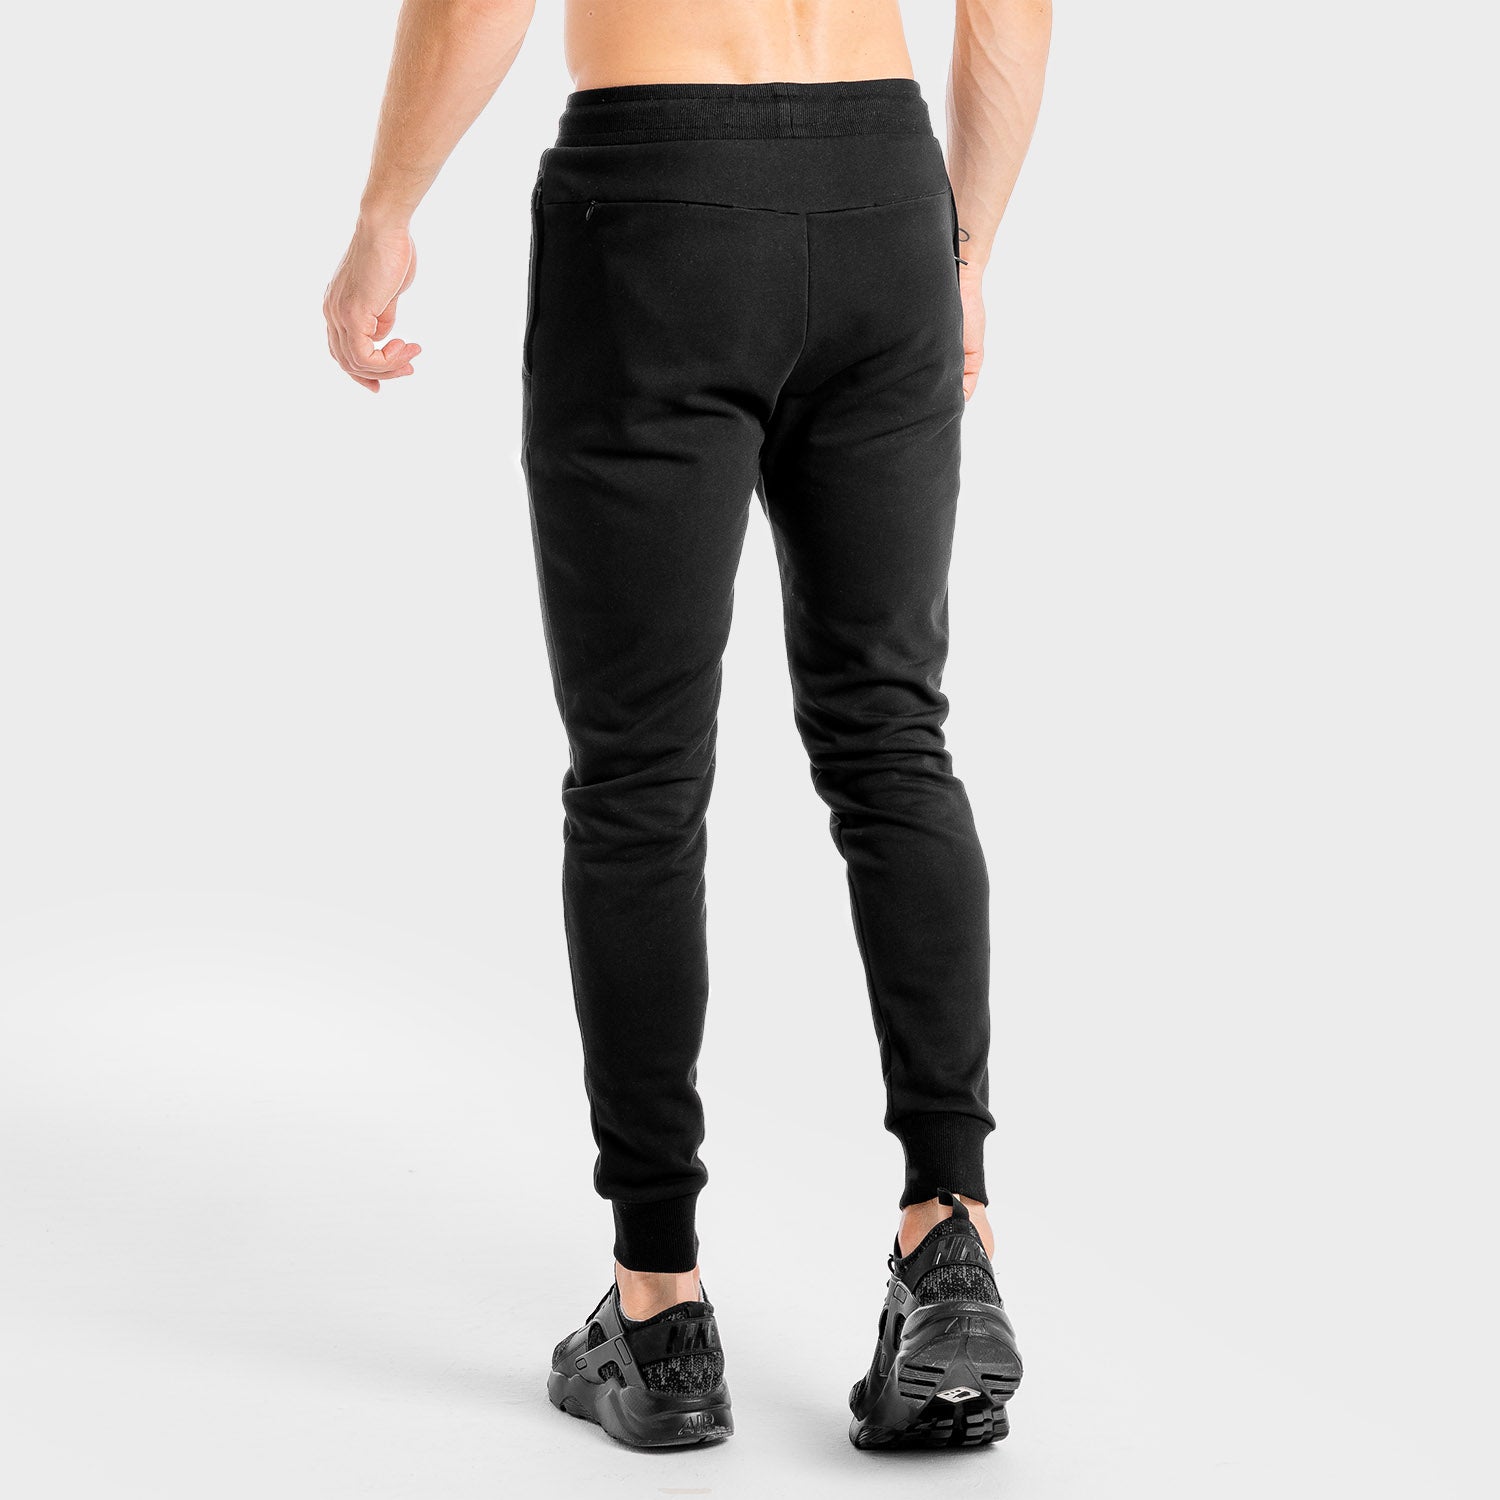 squatwolf-gym-wear-core-cuffed-joggers-black-workout-pants-for-men